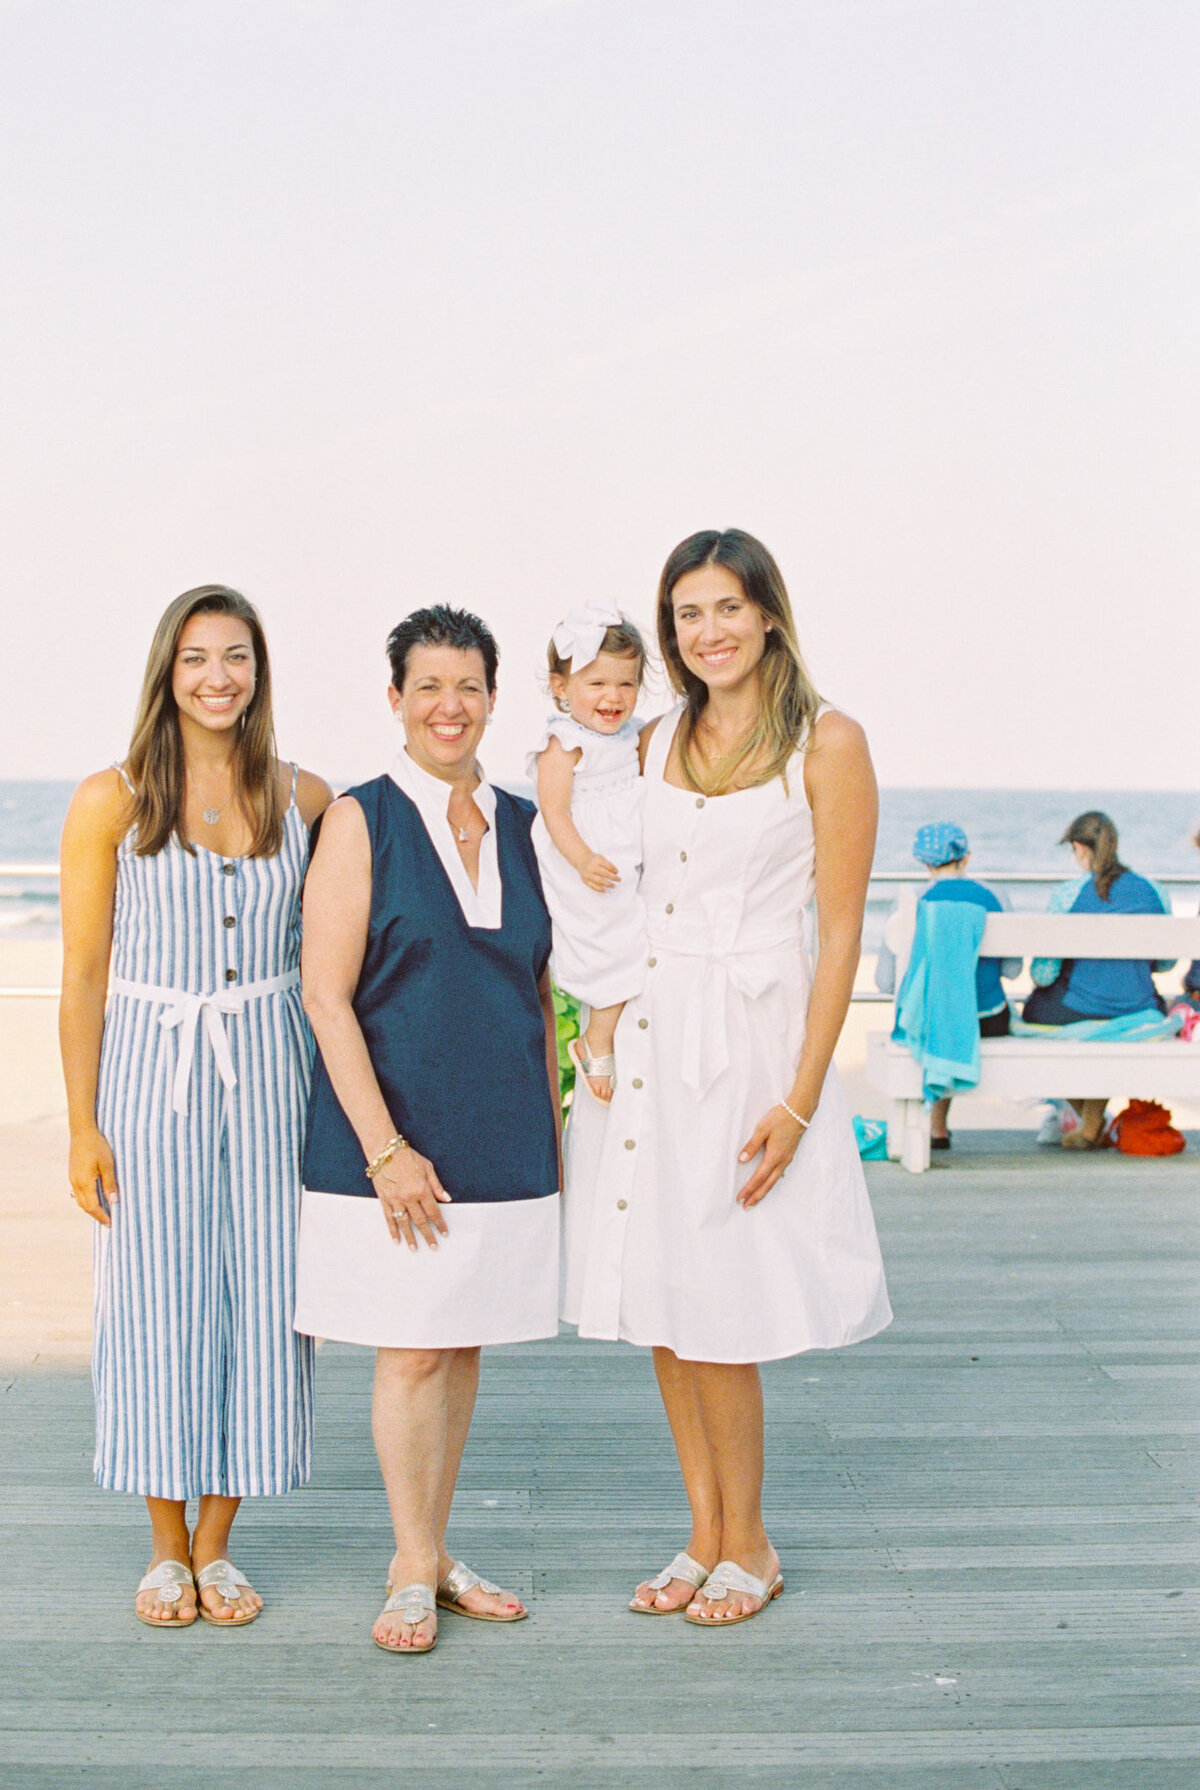 Michelle Behre Photography NJ Fine Art Photographer Seaside Family Lifestyle Family Portrait Session in Avon-by-the-Sea-131